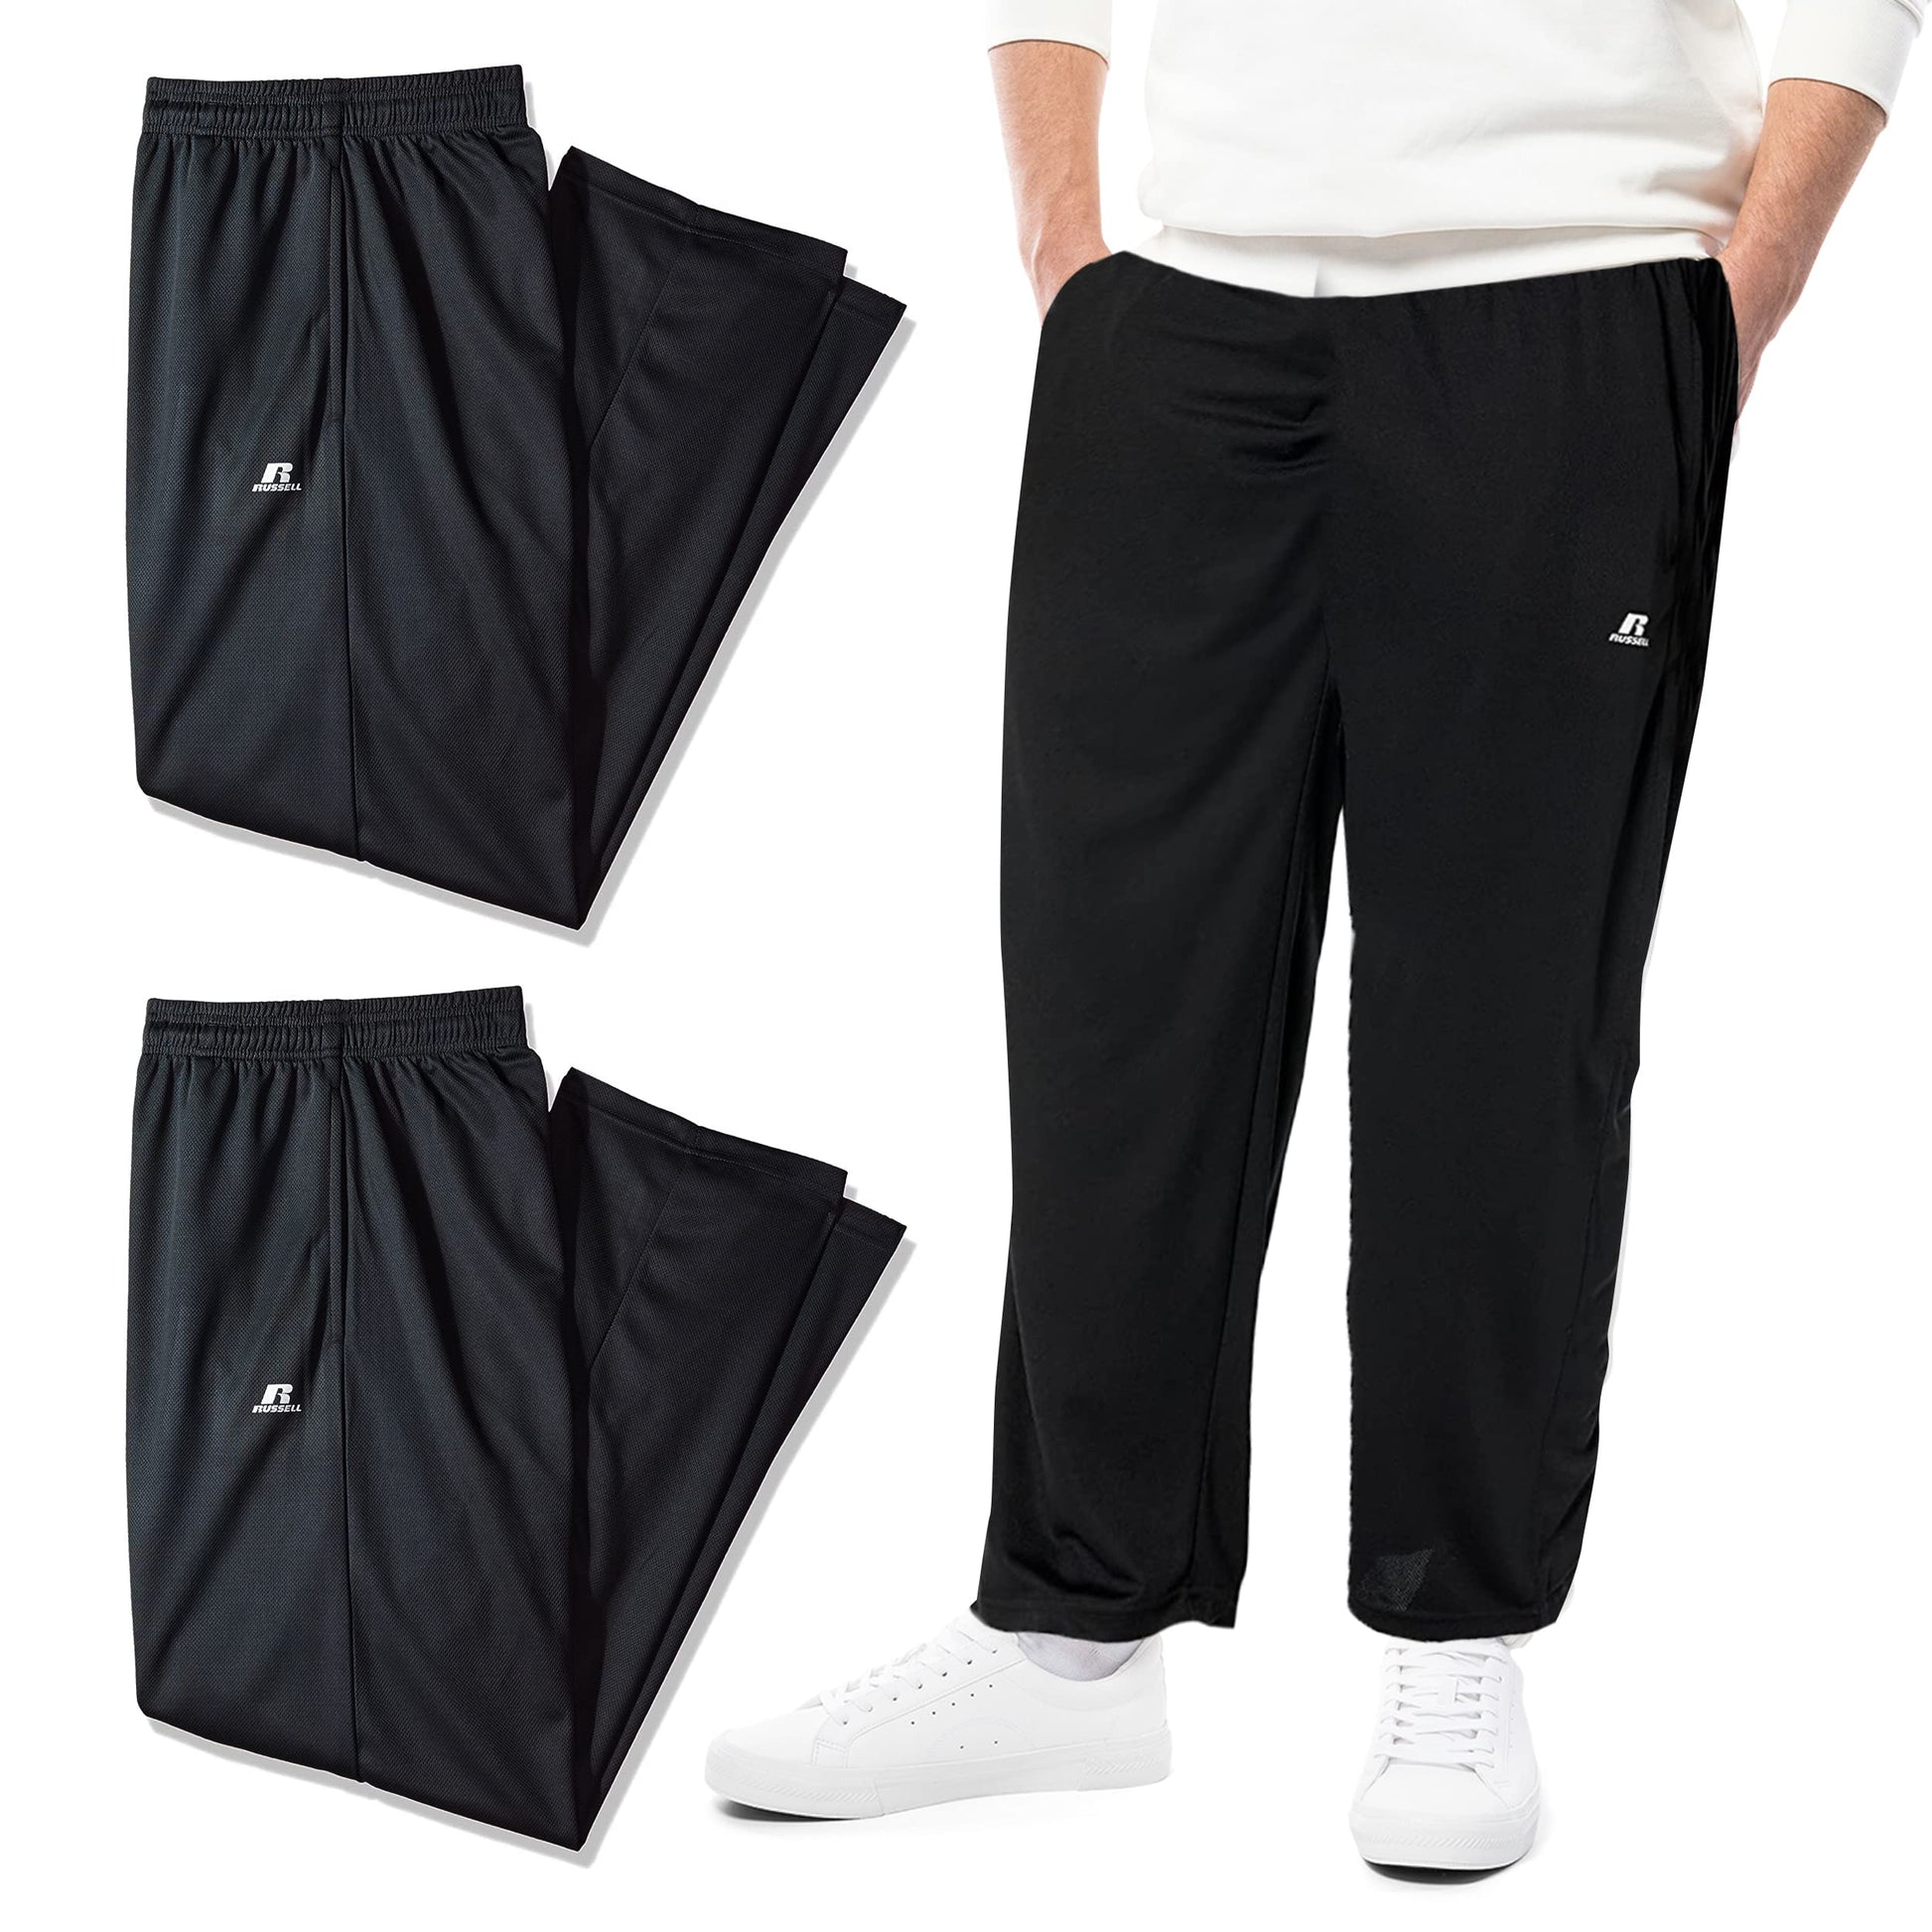 Russell Athletic Big & Tall Track Pants for Men, 2 Pack – XL Men's